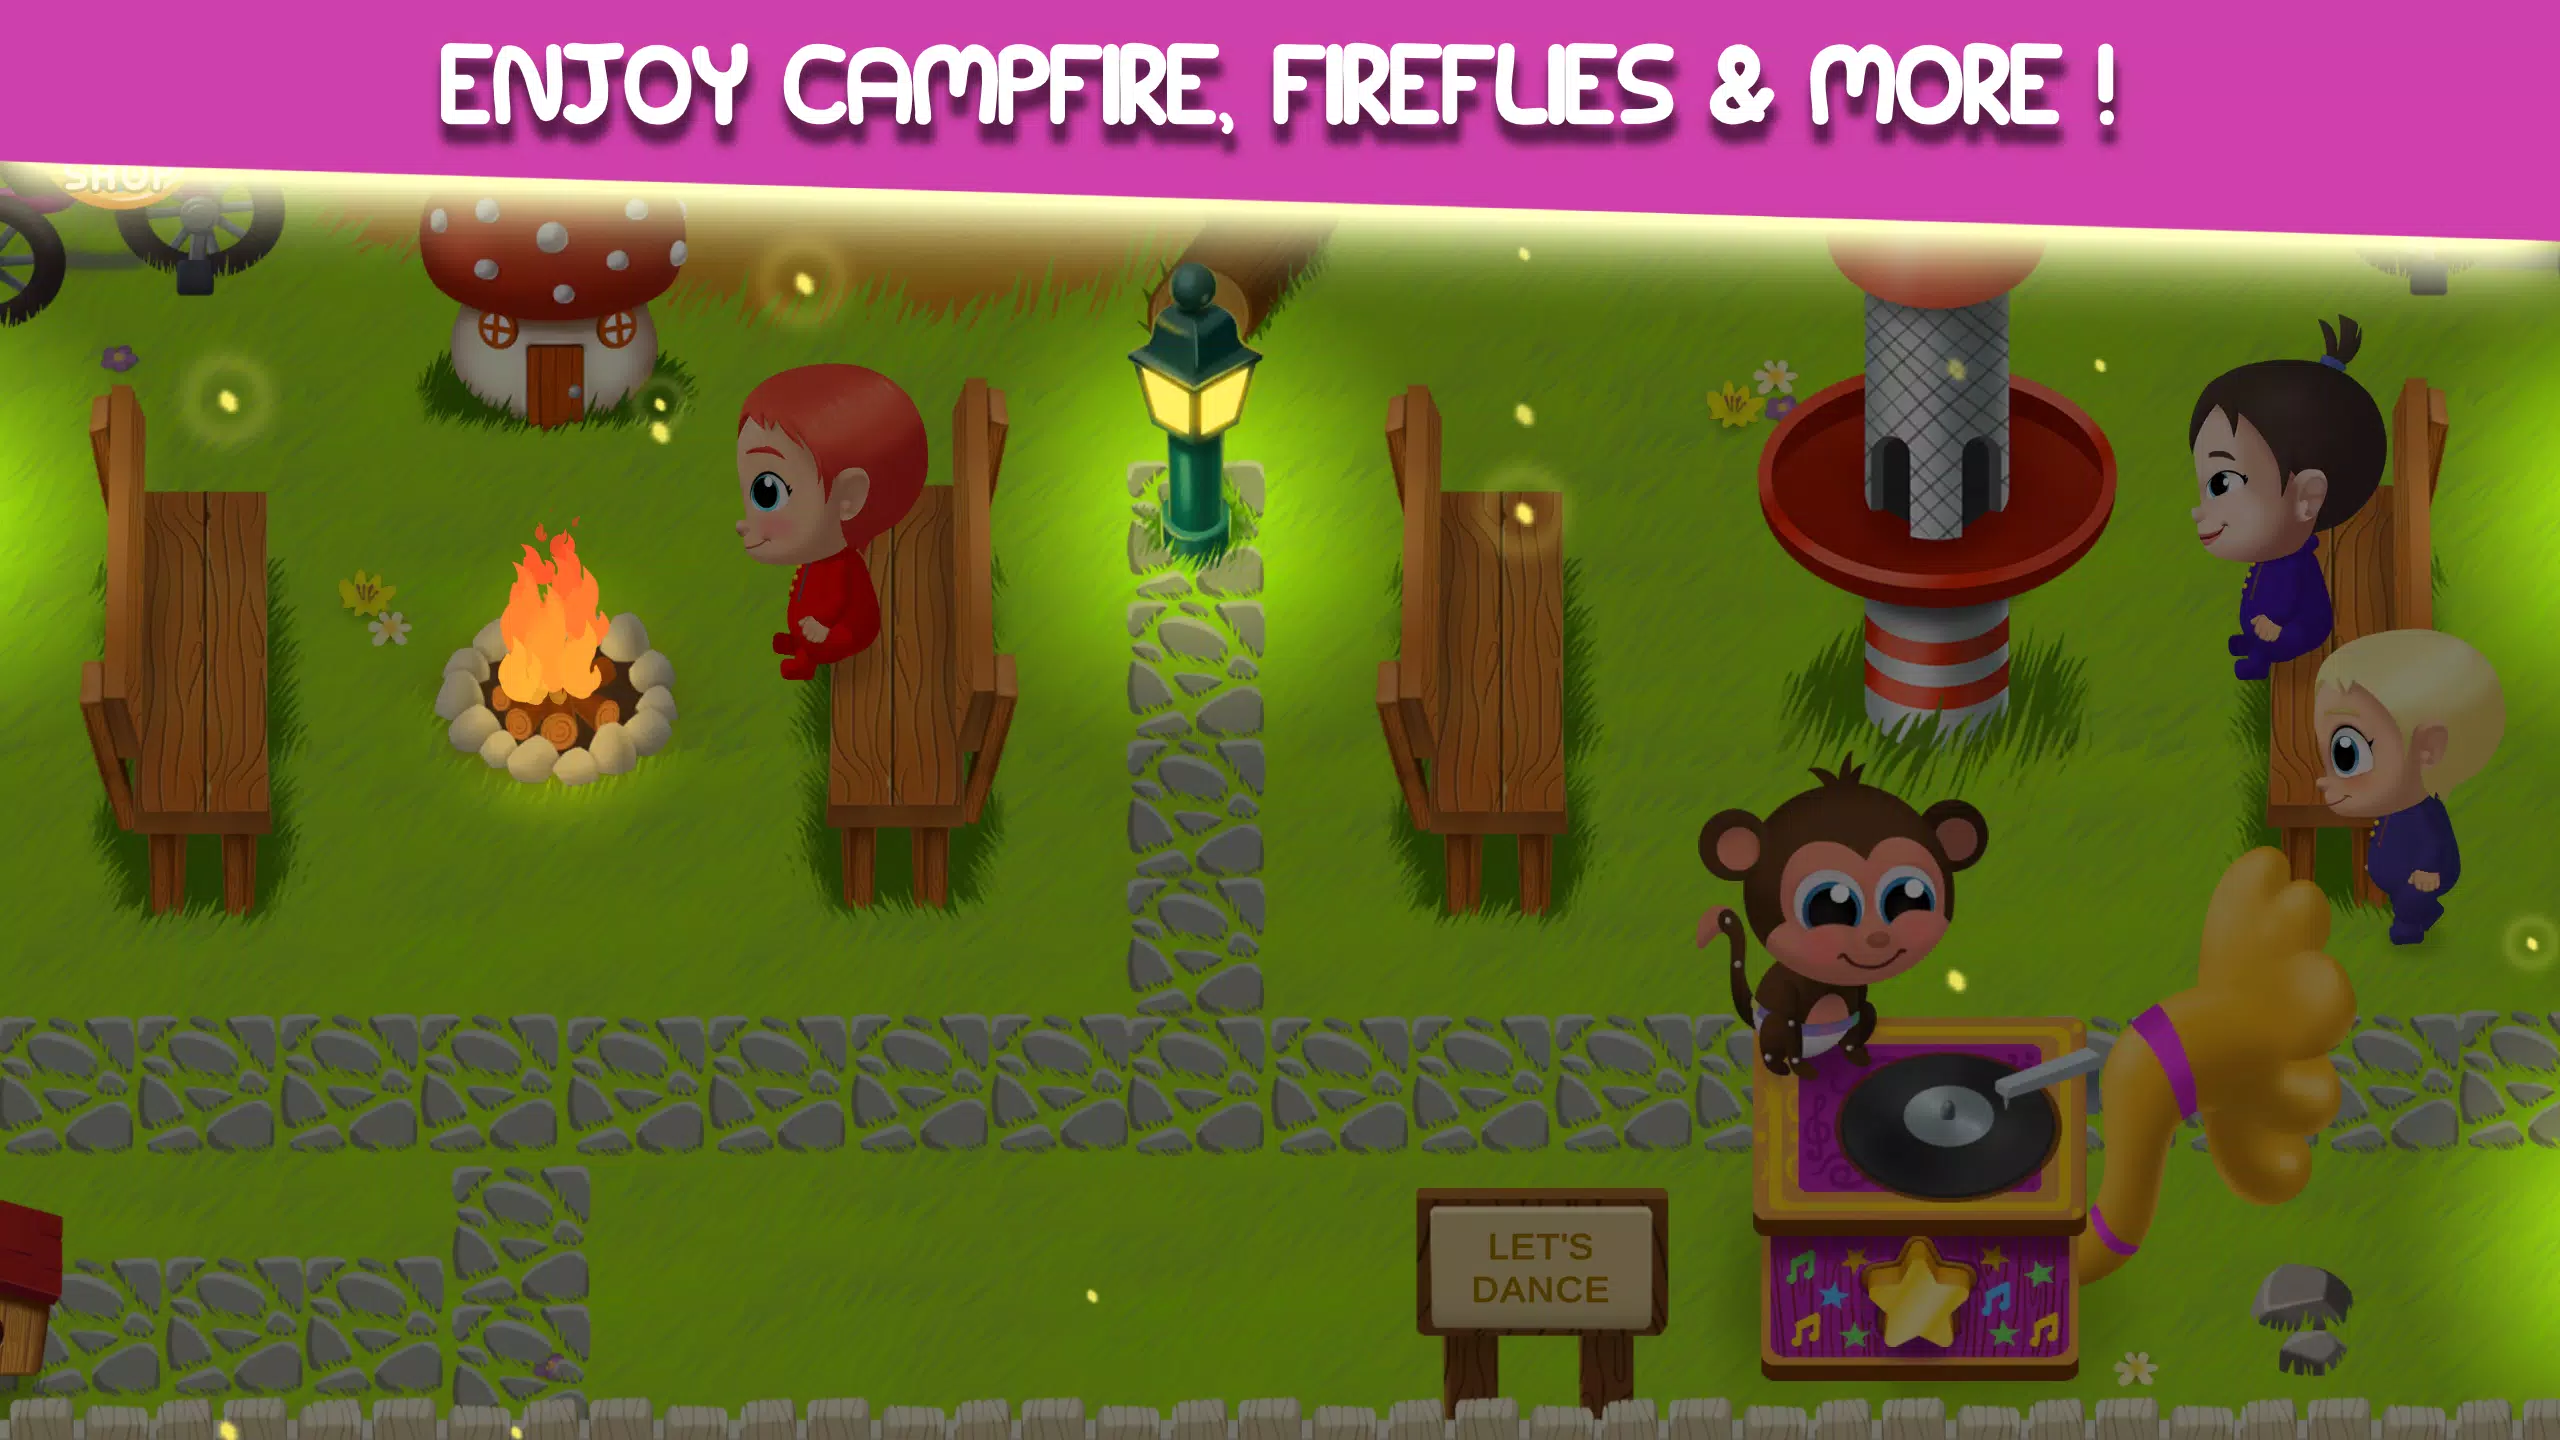 Joy Joy World for iOS (iPhone/iPad) - Free Download at AppPure